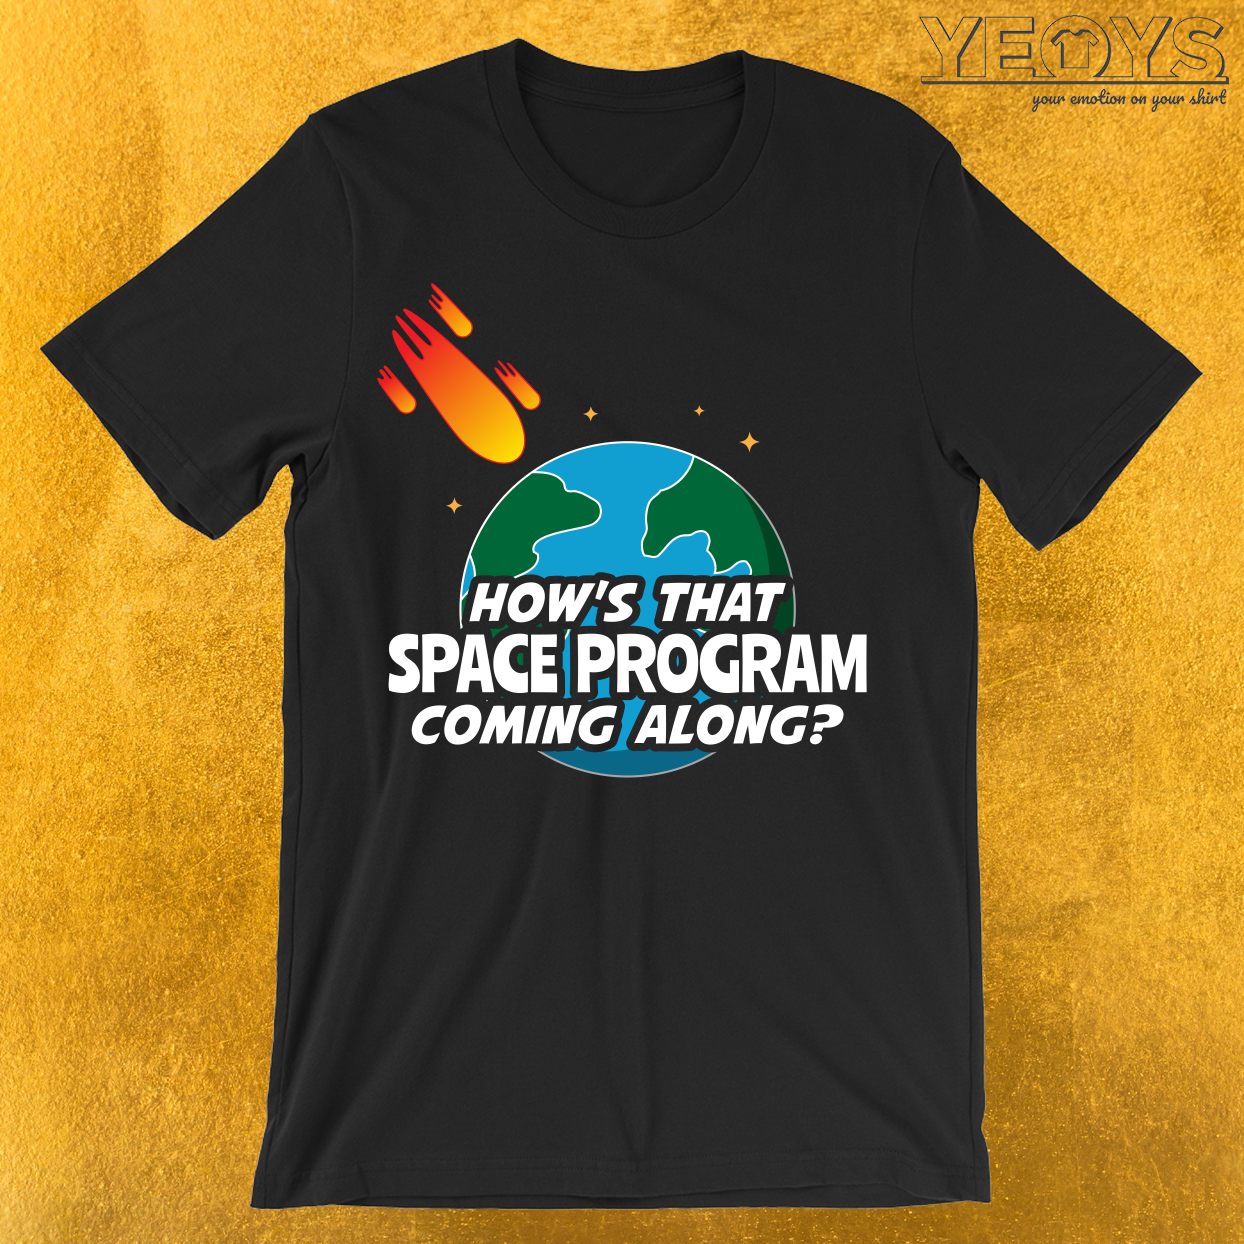 How’s That Space Program Coming Along? T-Shirt